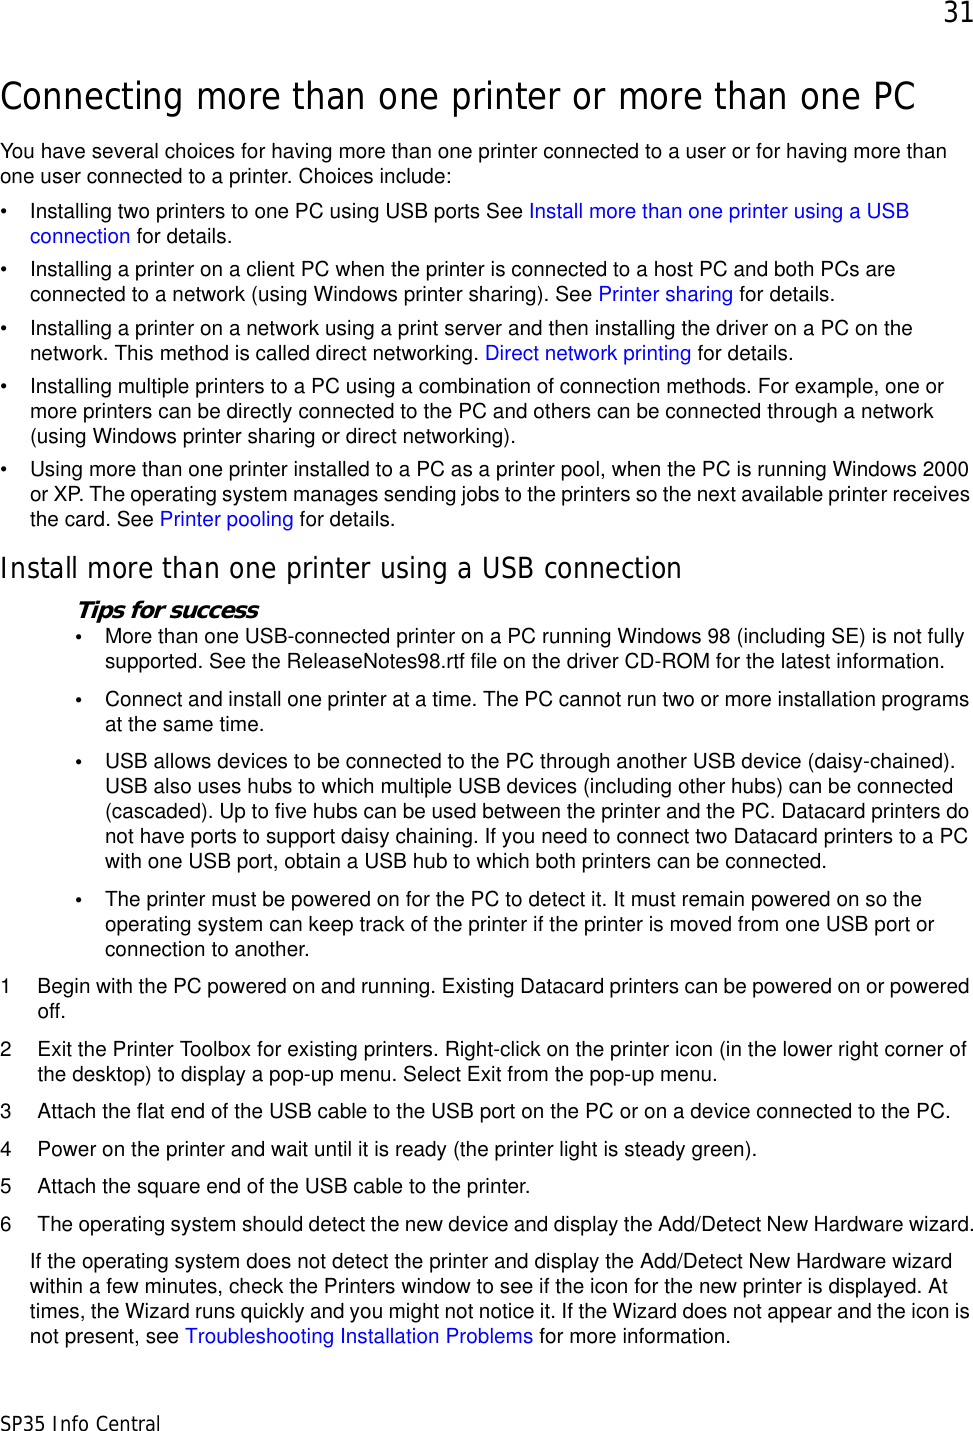 31SP35 Info CentralConnecting more than one printer or more than one PCYou have several choices for having more than one printer connected to a user or for having more than one user connected to a printer. Choices include:• Installing two printers to one PC using USB ports See Install more than one printer using a USB connection for details.• Installing a printer on a client PC when the printer is connected to a host PC and both PCs are connected to a network (using Windows printer sharing). See Printer sharing for details.• Installing a printer on a network using a print server and then installing the driver on a PC on the network. This method is called direct networking. Direct network printing for details.• Installing multiple printers to a PC using a combination of connection methods. For example, one or more printers can be directly connected to the PC and others can be connected through a network (using Windows printer sharing or direct networking).• Using more than one printer installed to a PC as a printer pool, when the PC is running Windows 2000 or XP. The operating system manages sending jobs to the printers so the next available printer receives the card. See Printer pooling for details.Install more than one printer using a USB connectionTips for success•More than one USB-connected printer on a PC running Windows 98 (including SE) is not fully supported. See the ReleaseNotes98.rtf file on the driver CD-ROM for the latest information.•Connect and install one printer at a time. The PC cannot run two or more installation programs at the same time.•USB allows devices to be connected to the PC through another USB device (daisy-chained). USB also uses hubs to which multiple USB devices (including other hubs) can be connected (cascaded). Up to five hubs can be used between the printer and the PC. Datacard printers do not have ports to support daisy chaining. If you need to connect two Datacard printers to a PC with one USB port, obtain a USB hub to which both printers can be connected.•The printer must be powered on for the PC to detect it. It must remain powered on so the operating system can keep track of the printer if the printer is moved from one USB port or connection to another.1 Begin with the PC powered on and running. Existing Datacard printers can be powered on or powered off. 2 Exit the Printer Toolbox for existing printers. Right-click on the printer icon (in the lower right corner of the desktop) to display a pop-up menu. Select Exit from the pop-up menu.3 Attach the flat end of the USB cable to the USB port on the PC or on a device connected to the PC. 4 Power on the printer and wait until it is ready (the printer light is steady green).5 Attach the square end of the USB cable to the printer.6 The operating system should detect the new device and display the Add/Detect New Hardware wizard.If the operating system does not detect the printer and display the Add/Detect New Hardware wizard within a few minutes, check the Printers window to see if the icon for the new printer is displayed. At times, the Wizard runs quickly and you might not notice it. If the Wizard does not appear and the icon is not present, see Troubleshooting Installation Problems for more information.